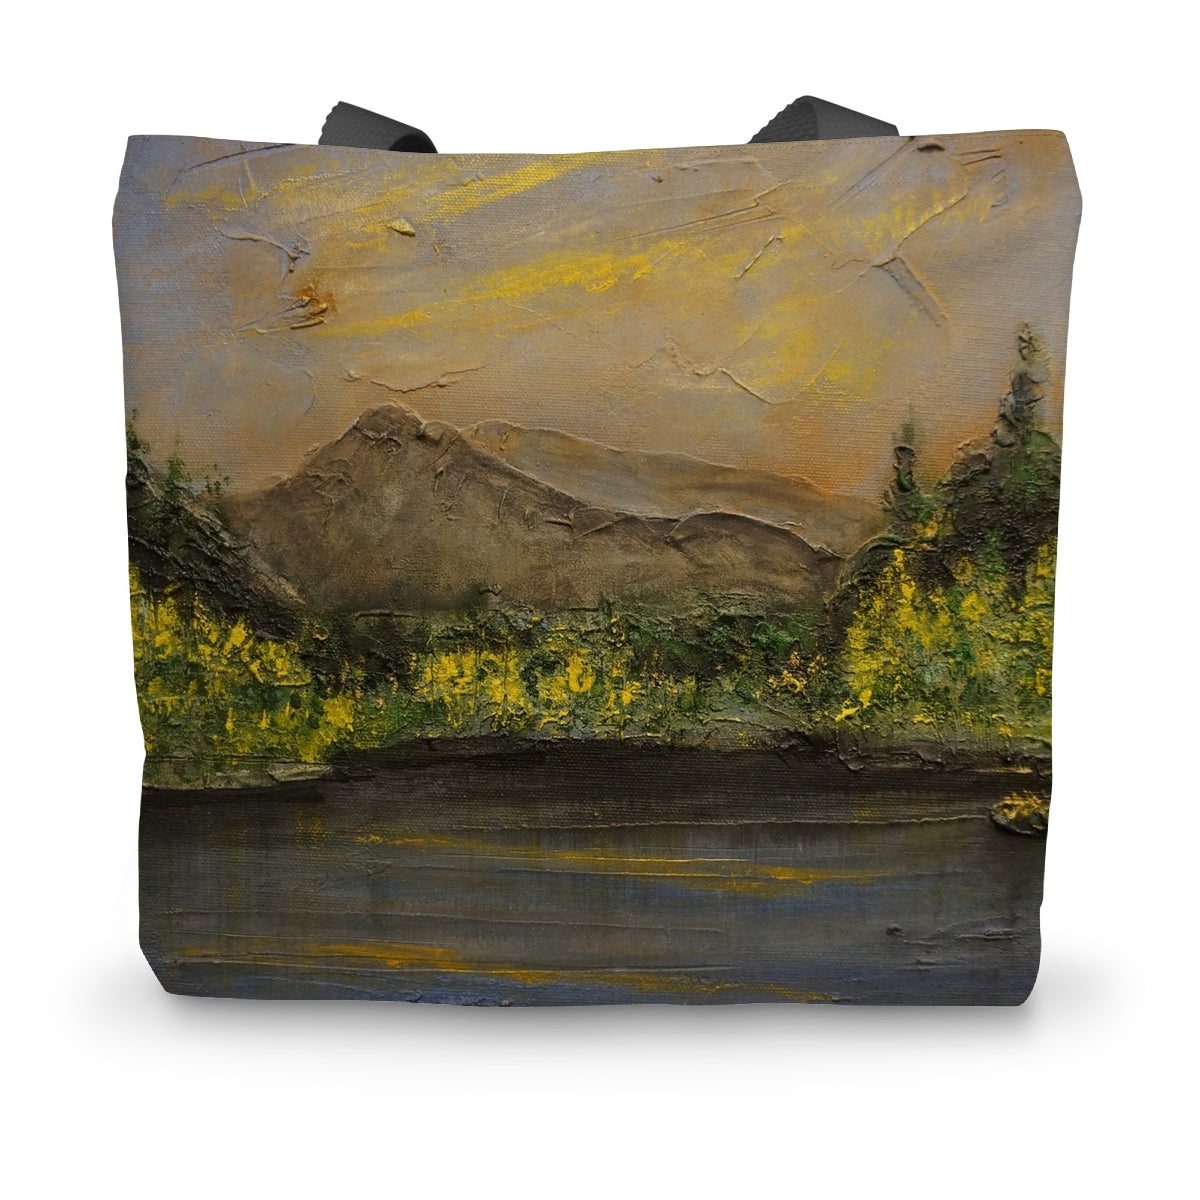 Glencoe Lochan Dusk Art Gifts Canvas Tote Bag-Bags-Scottish Lochs & Mountains Art Gallery-14"x18.5"-Paintings, Prints, Homeware, Art Gifts From Scotland By Scottish Artist Kevin Hunter